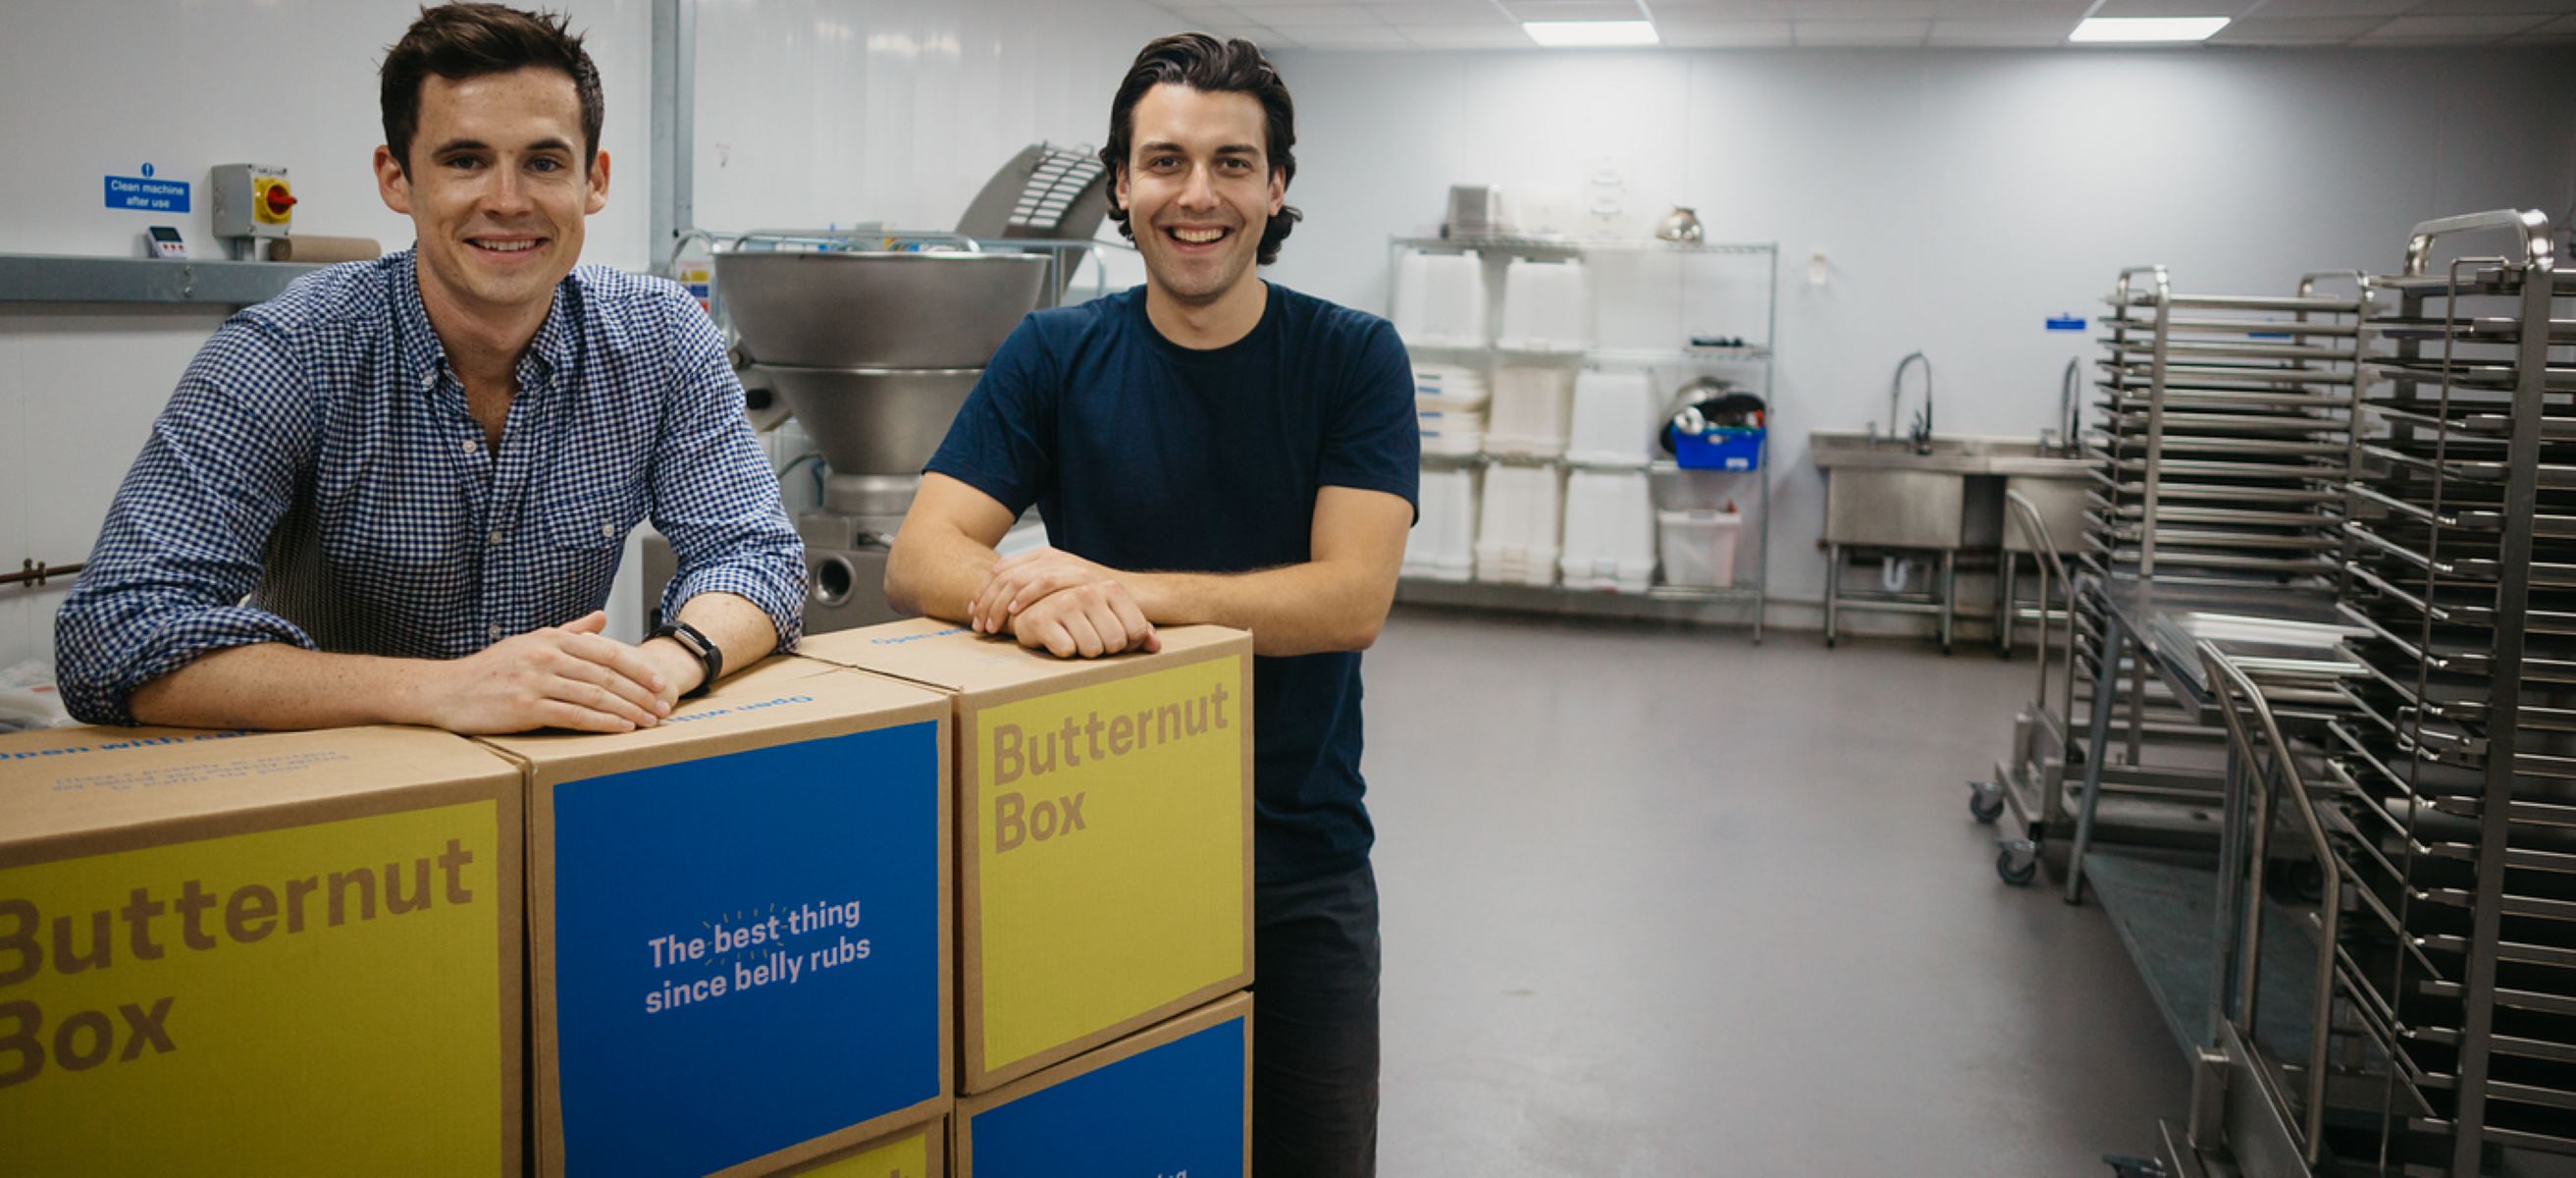 butternut-box-secures-354-million-in-funding-for-subscription-canine-cuisine